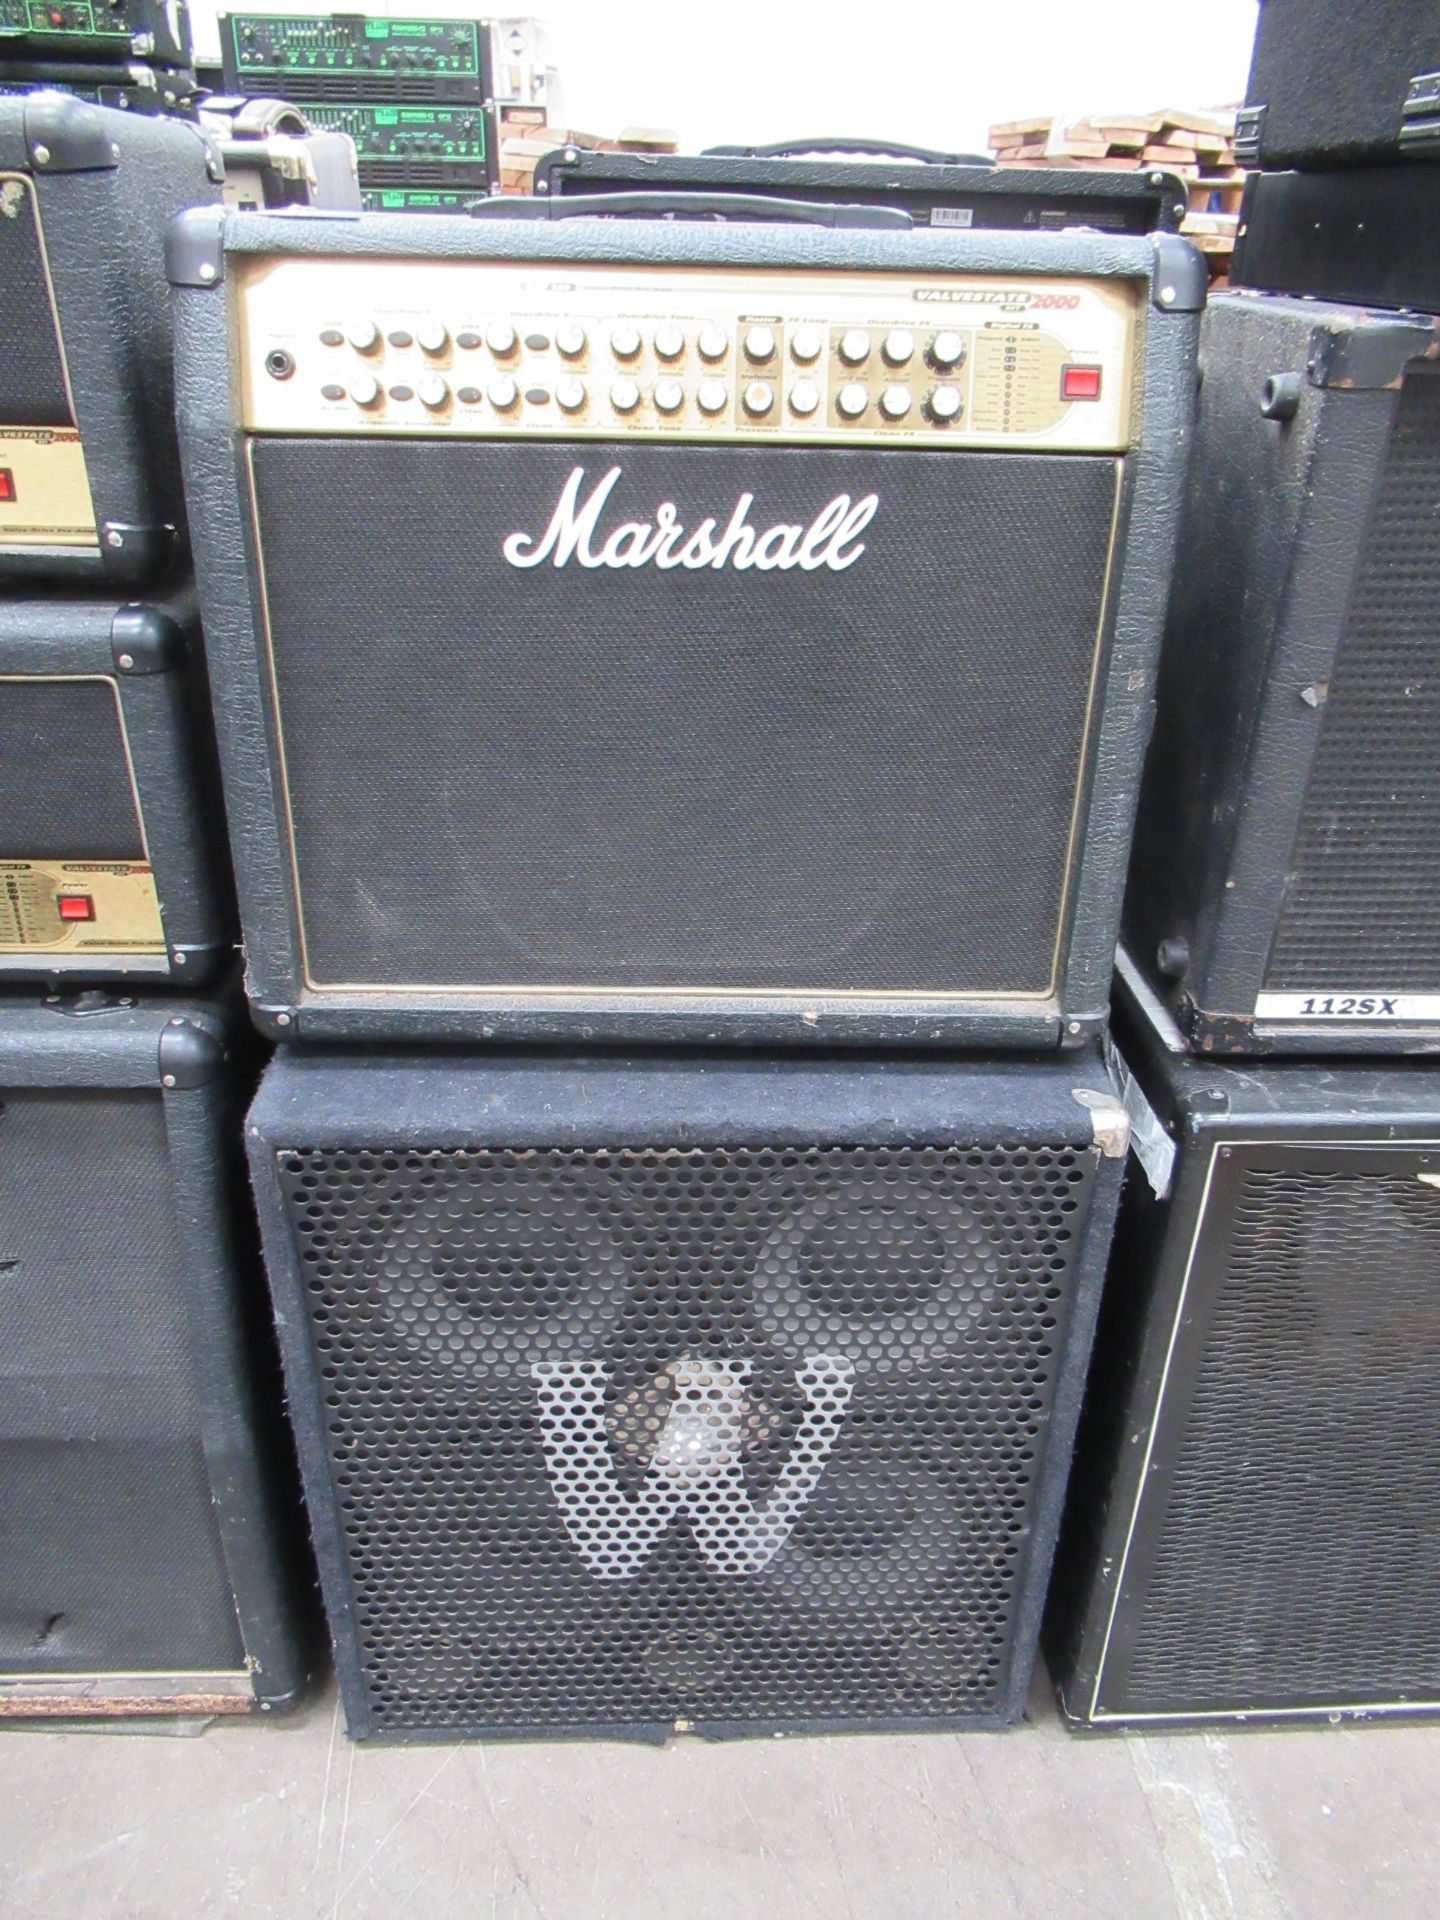 Marshall Pre-Amp and a speaker